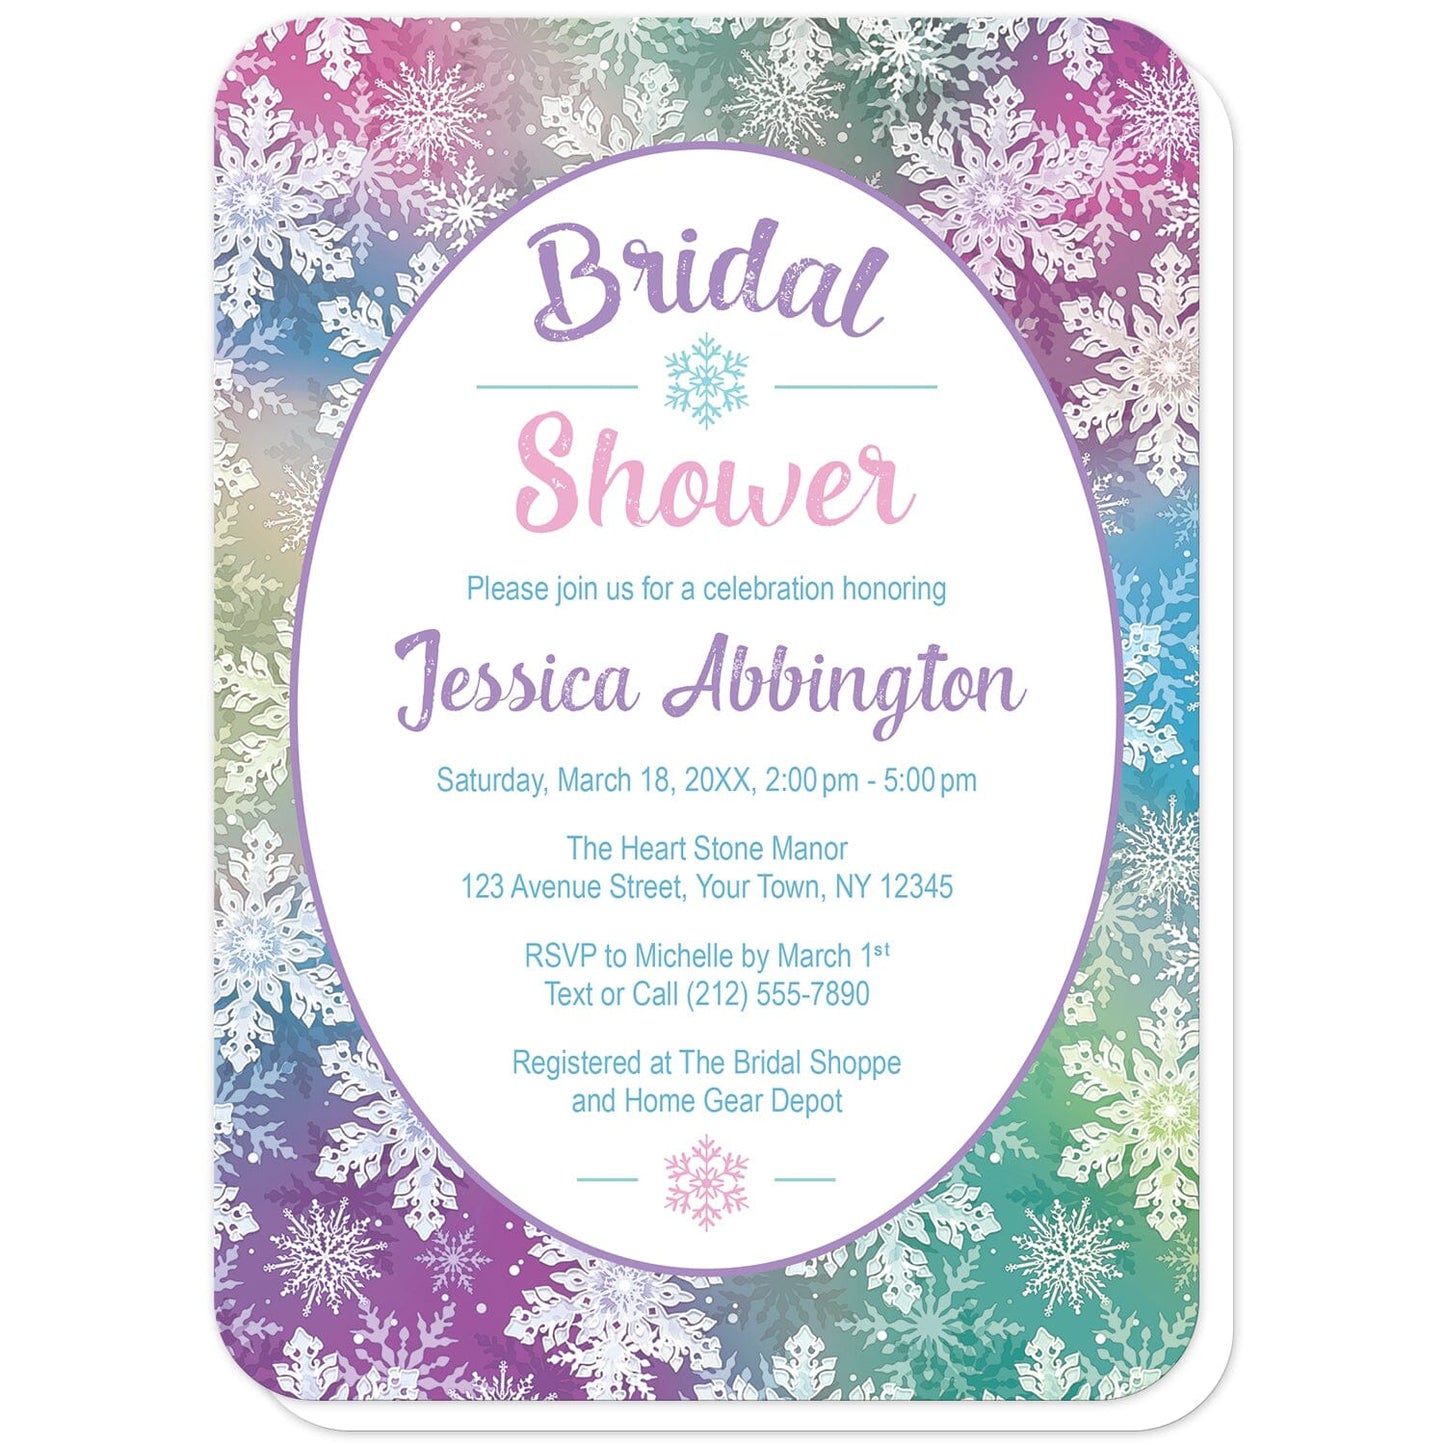 Rainbow Snowflake Bridal Shower Invitations (with rounded corners) at Artistically Invited. Rainbow snowflake bridal shower invitations designed with your personalized bridal shower details custom printed in colorful text in a white oval frame design over a beautiful and ornate rainbow snowflake pattern with white snowflakes over a multicolored background.